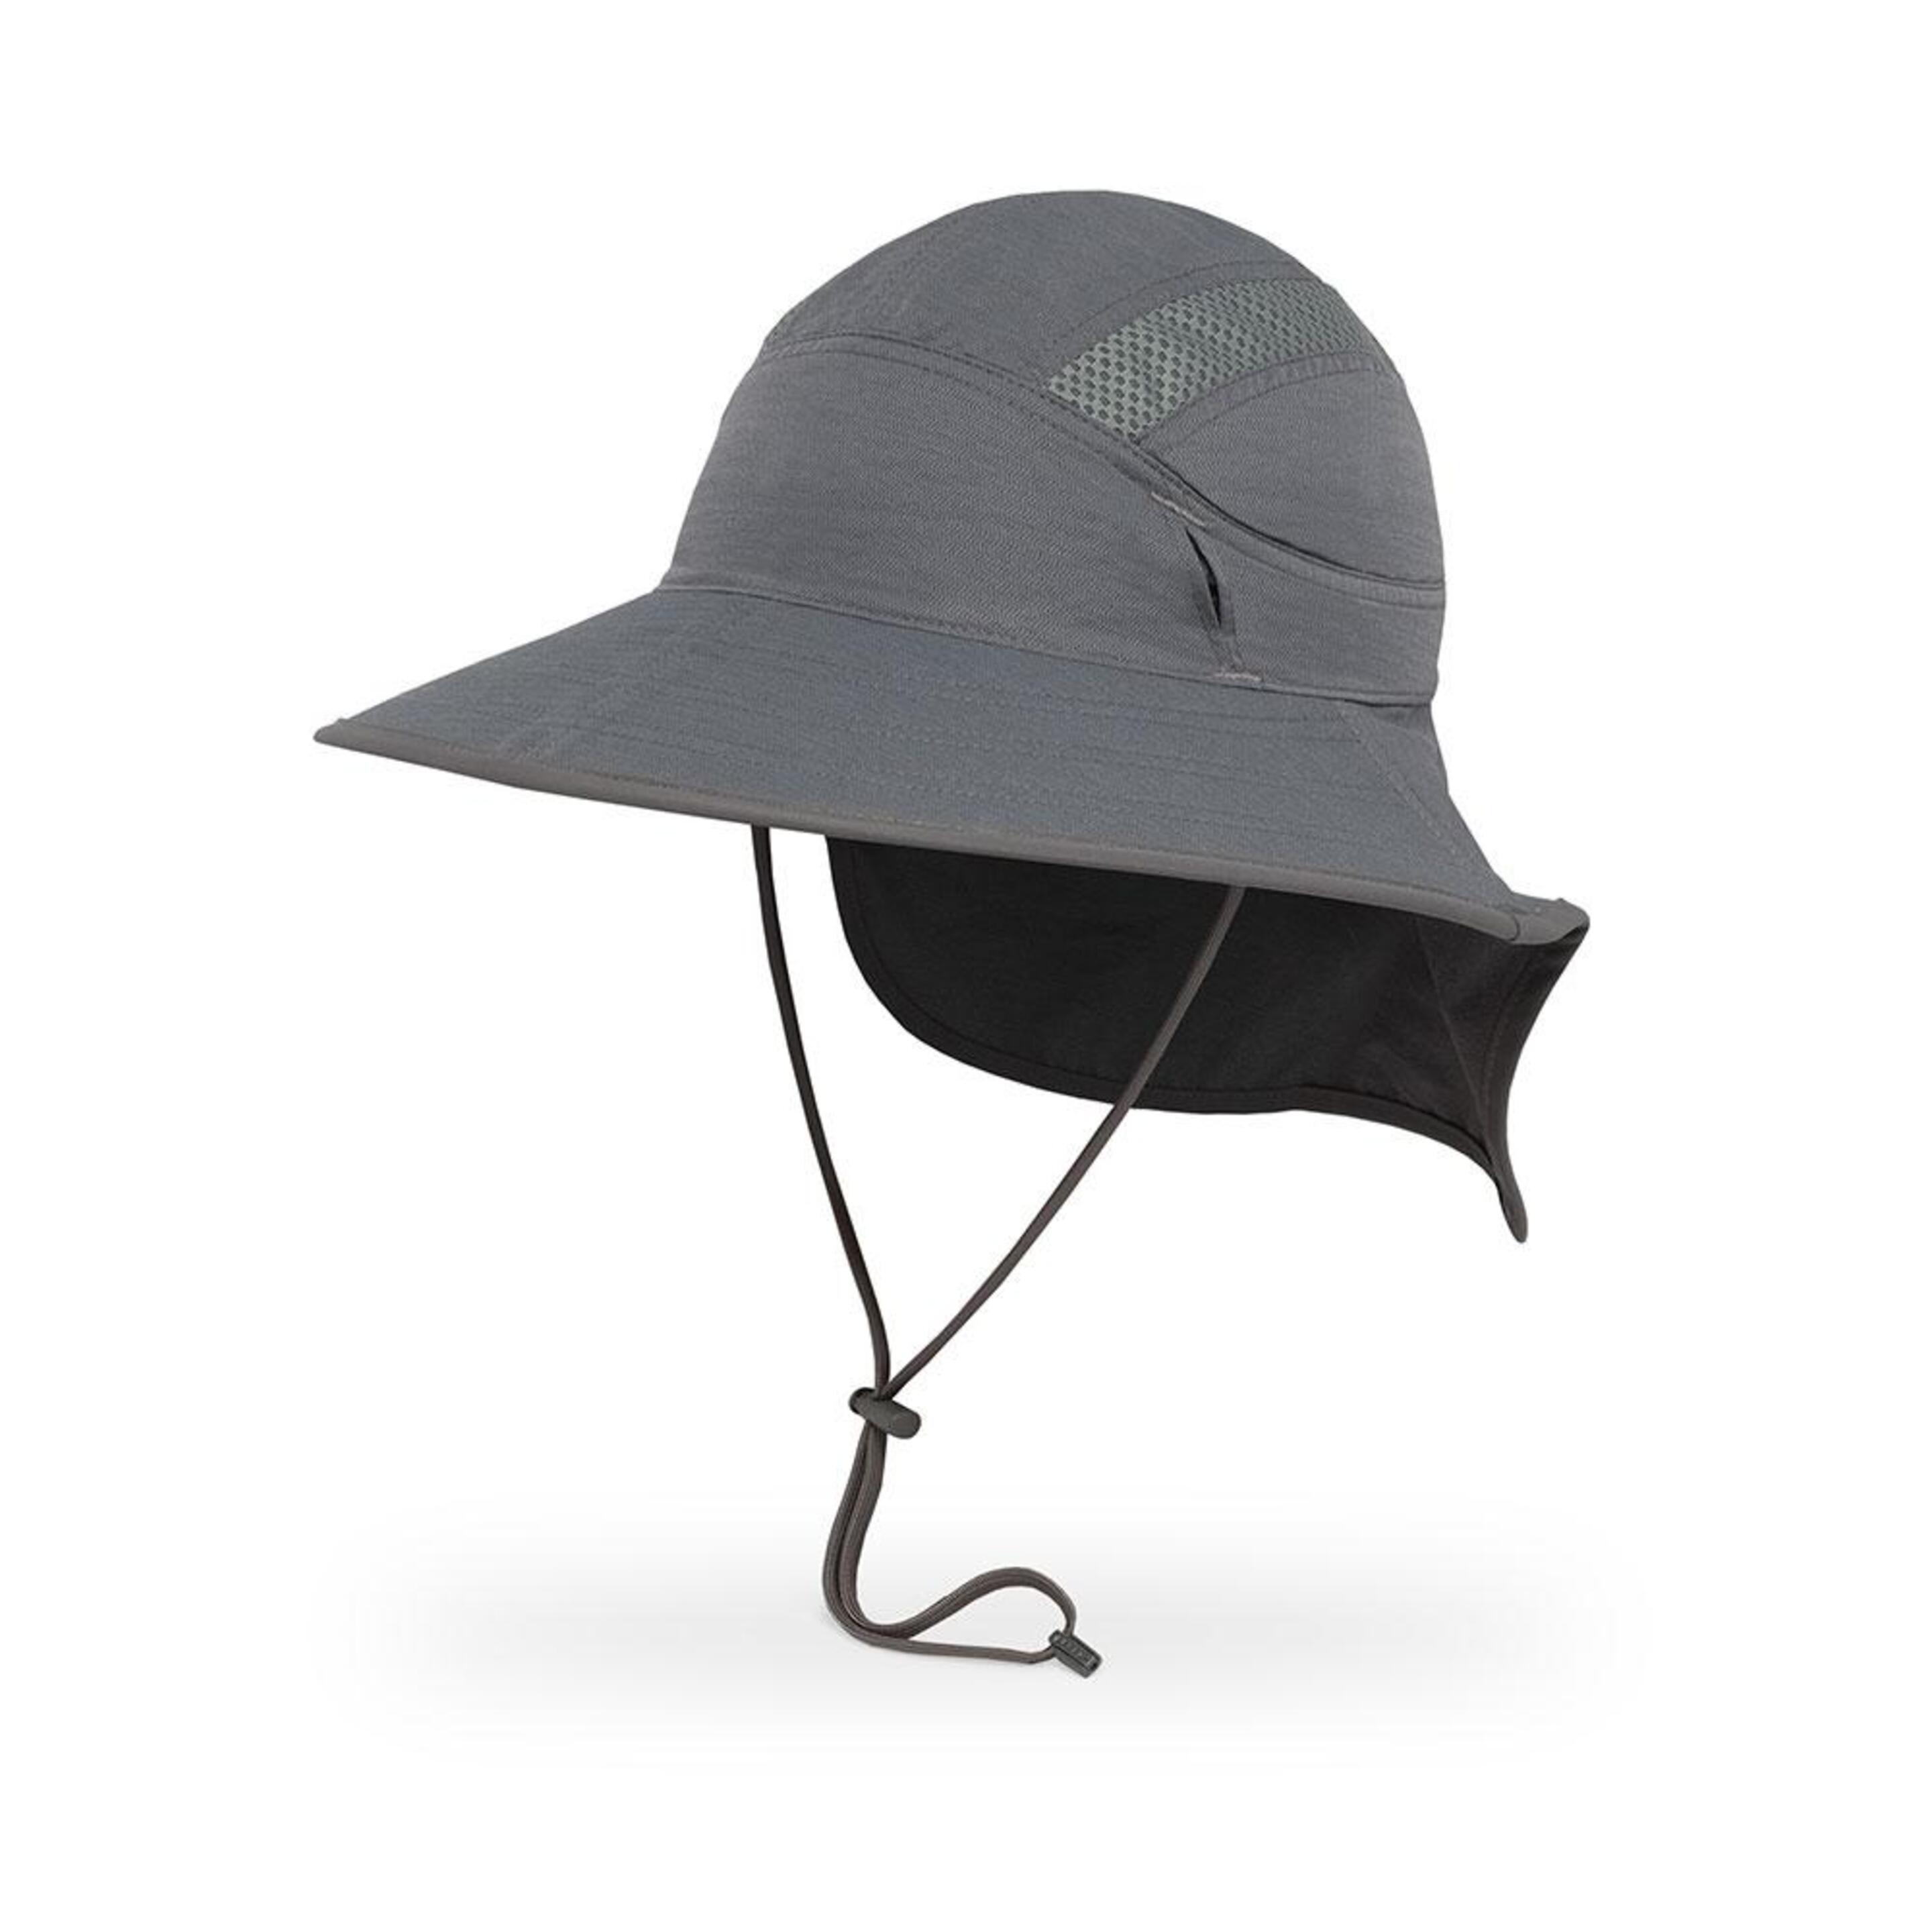 Sombrero Ultra Adventure Sunday Afternoons Upf 50+ - gris-oscuro - 